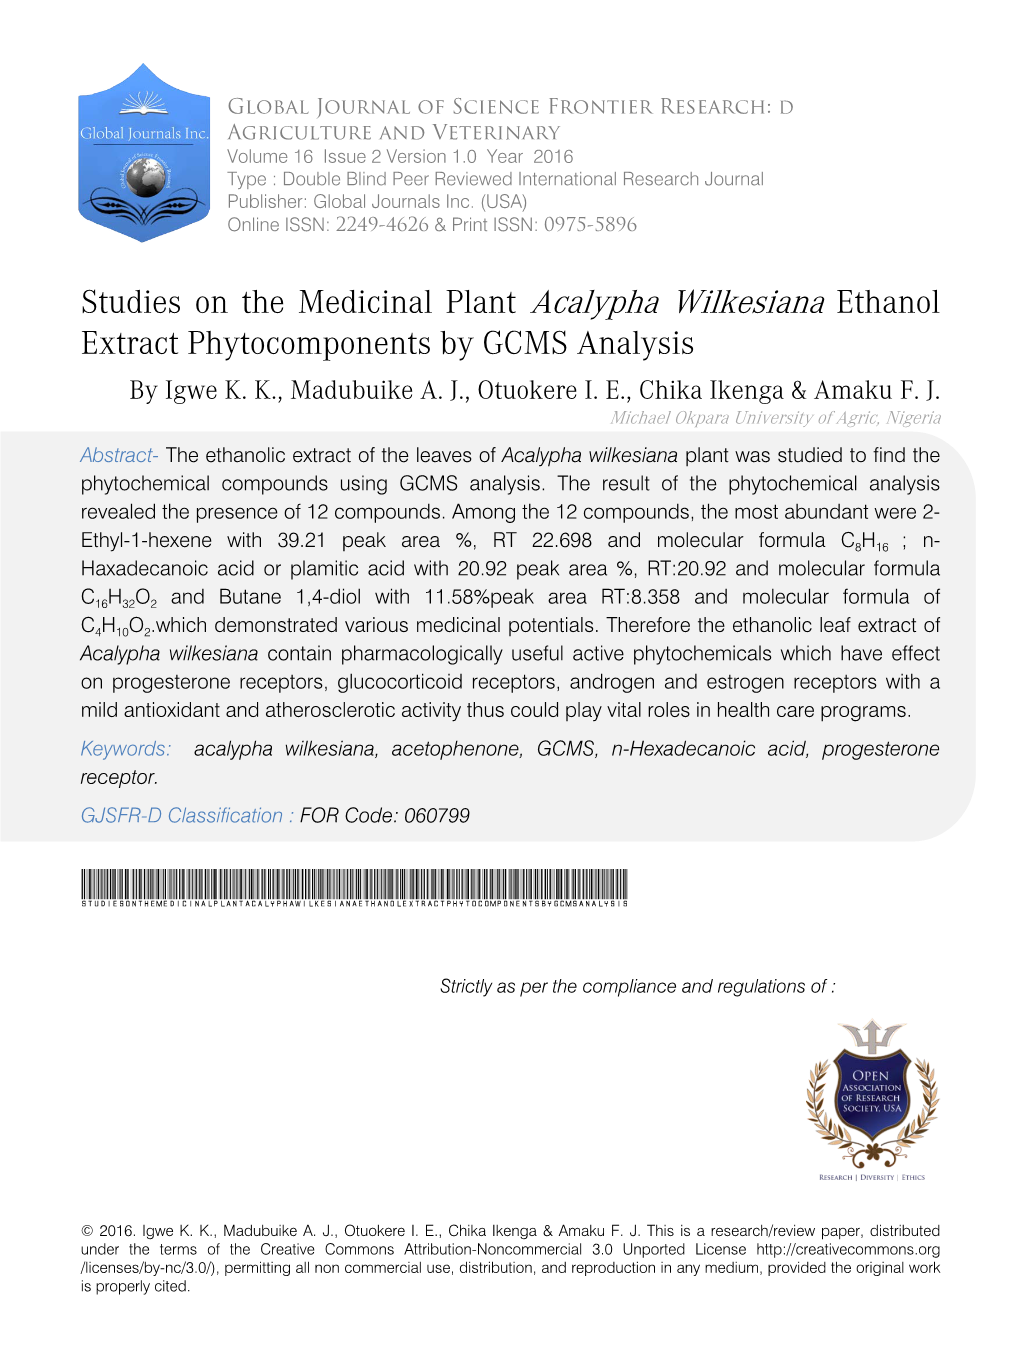 Studies on the Medicinal Plant Acalypha Wilkesiana Ethanol Extract Phytocomponents by GCMS Analysis by Igwe K